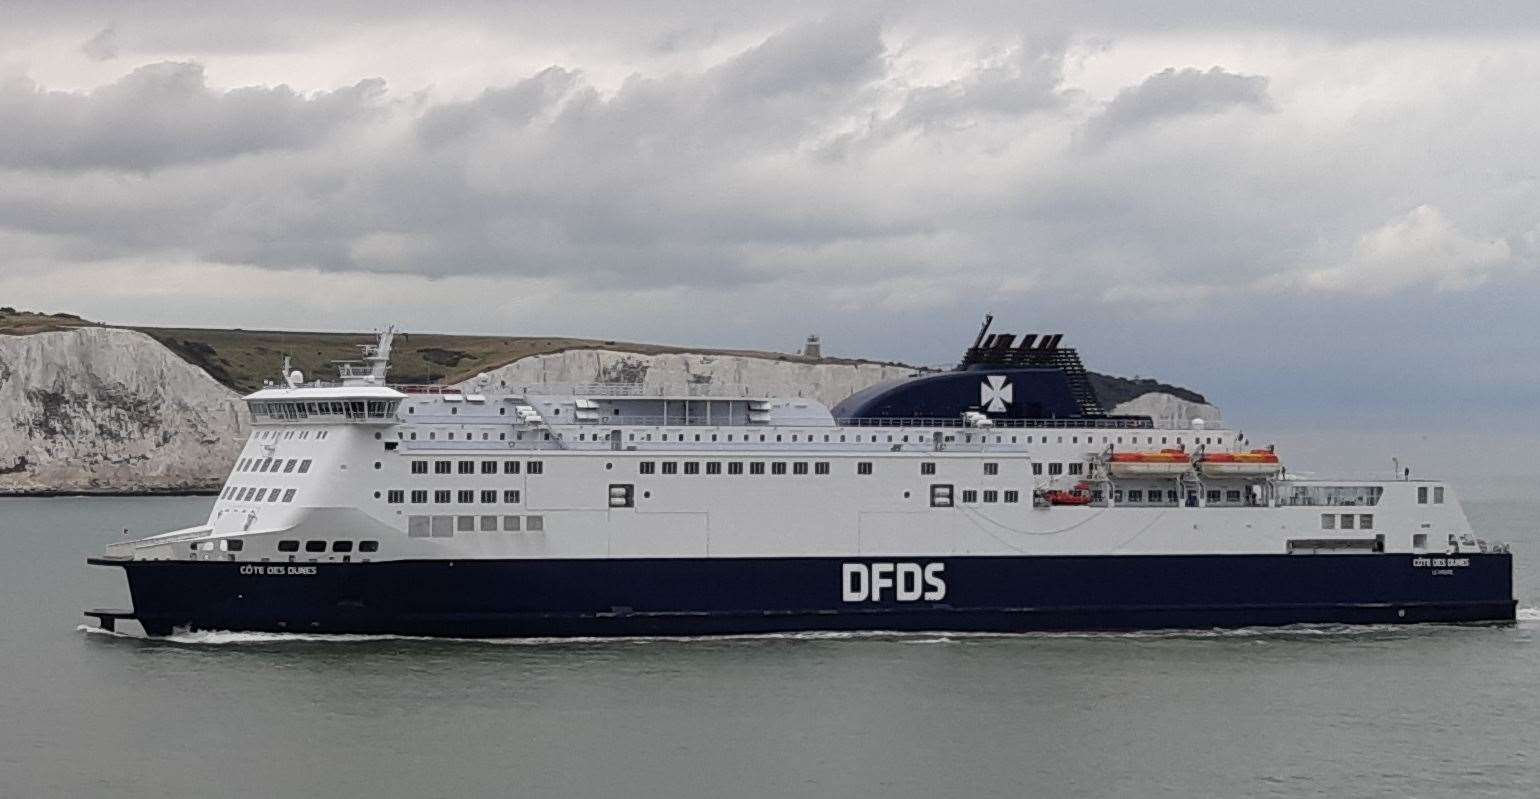 One of the DFDS fleet, Côtes des Dunes, outside Dover